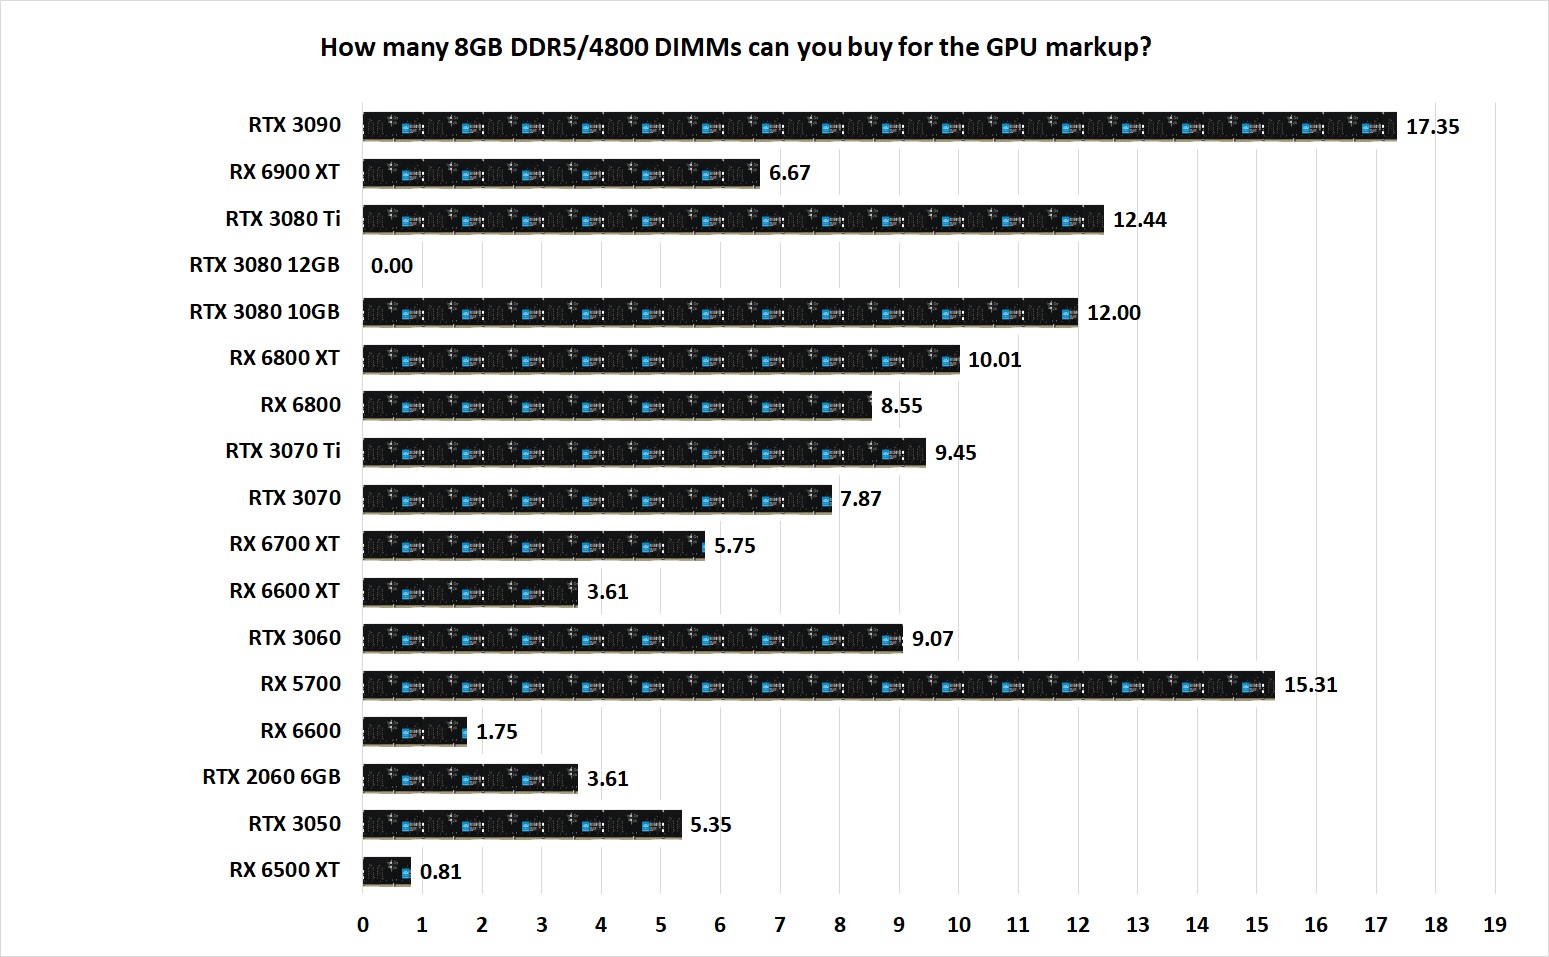 Image of how many DDR5 modules you could buy with the GPU Markup